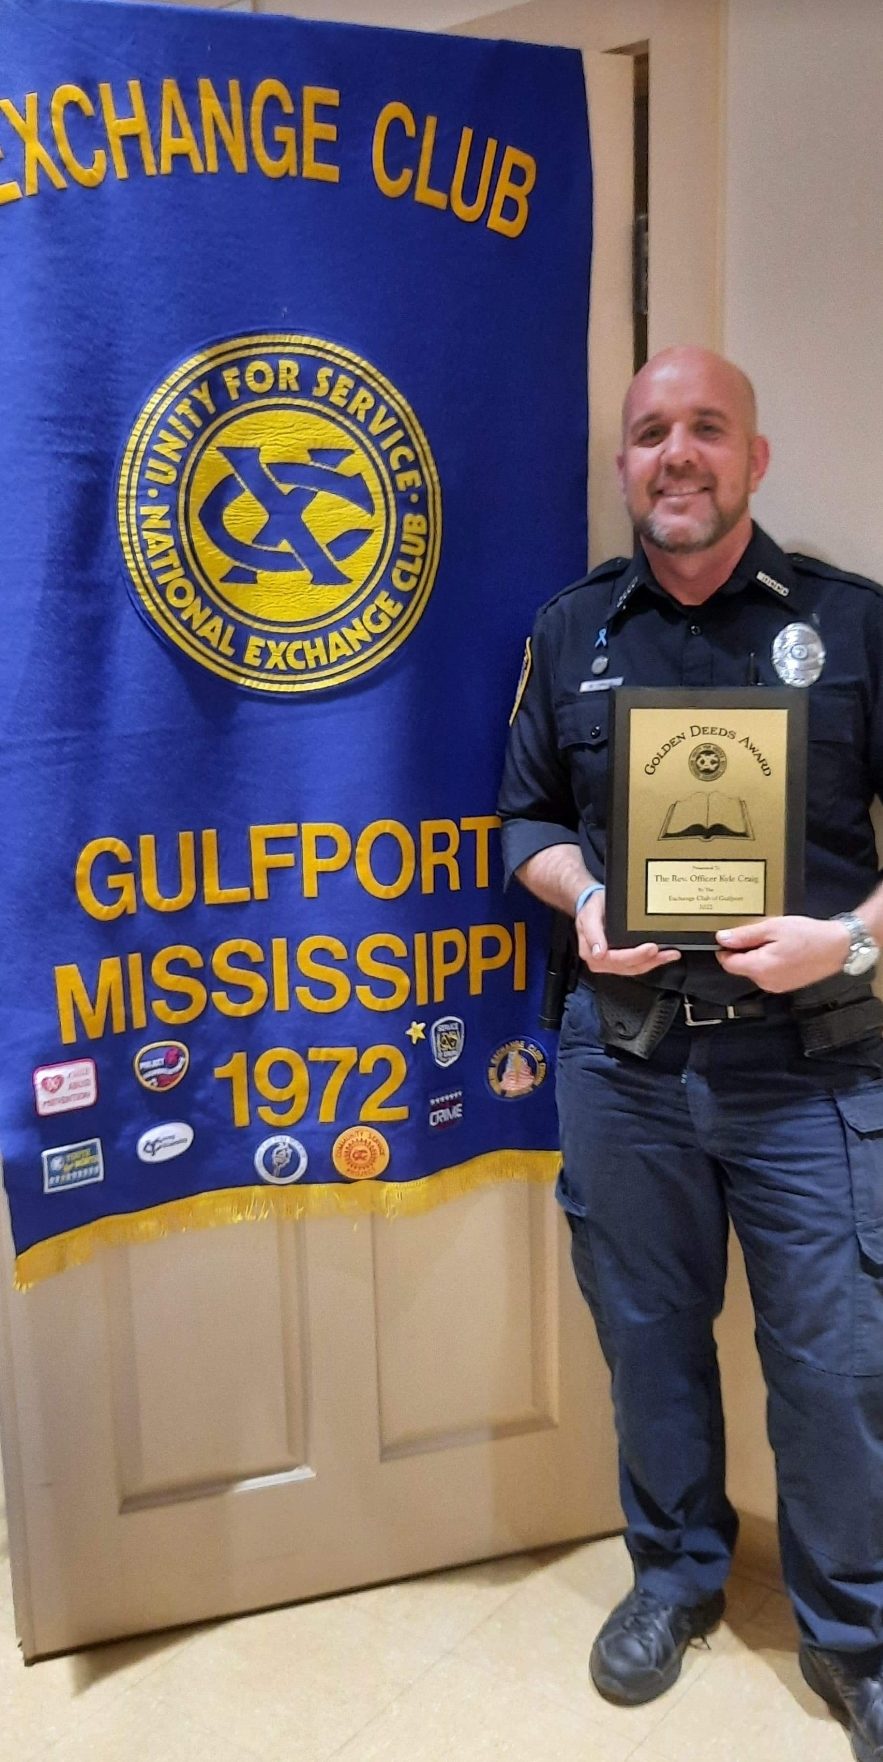 MGCCC police officer Kyle Craig awarded Golden Deeds Award by Gulfport Exchange Club